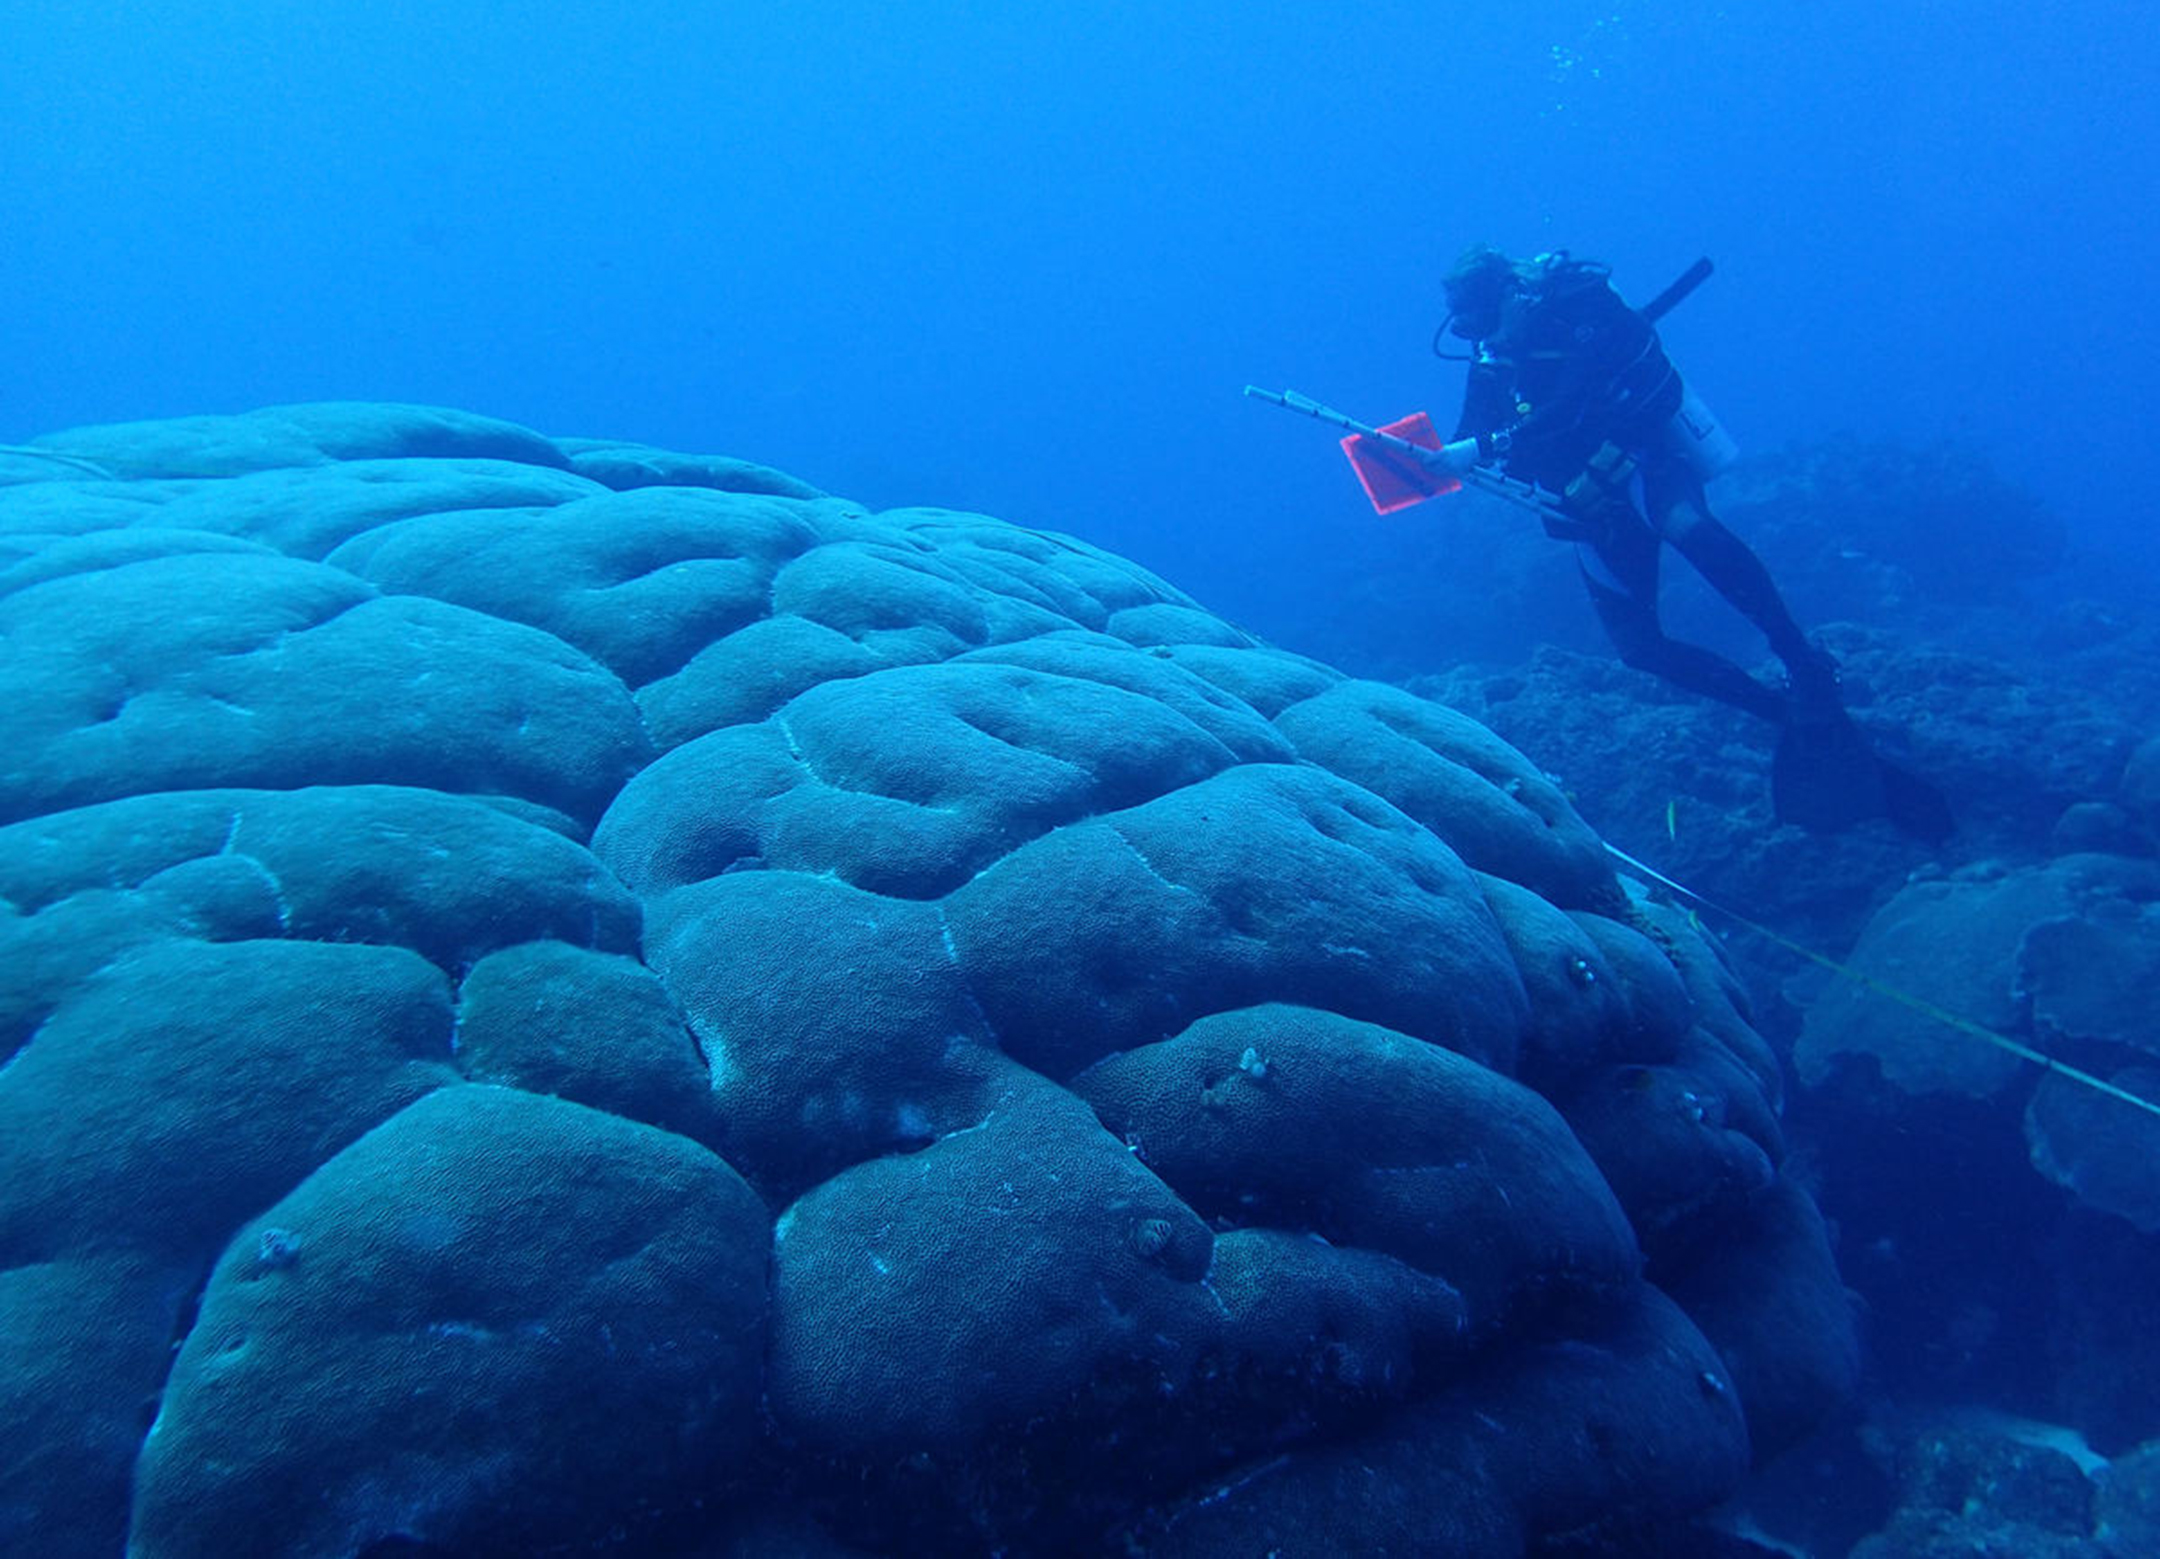 marine biologist under water studying a bulbous coral reef that looks like a pod of manatees clumped together